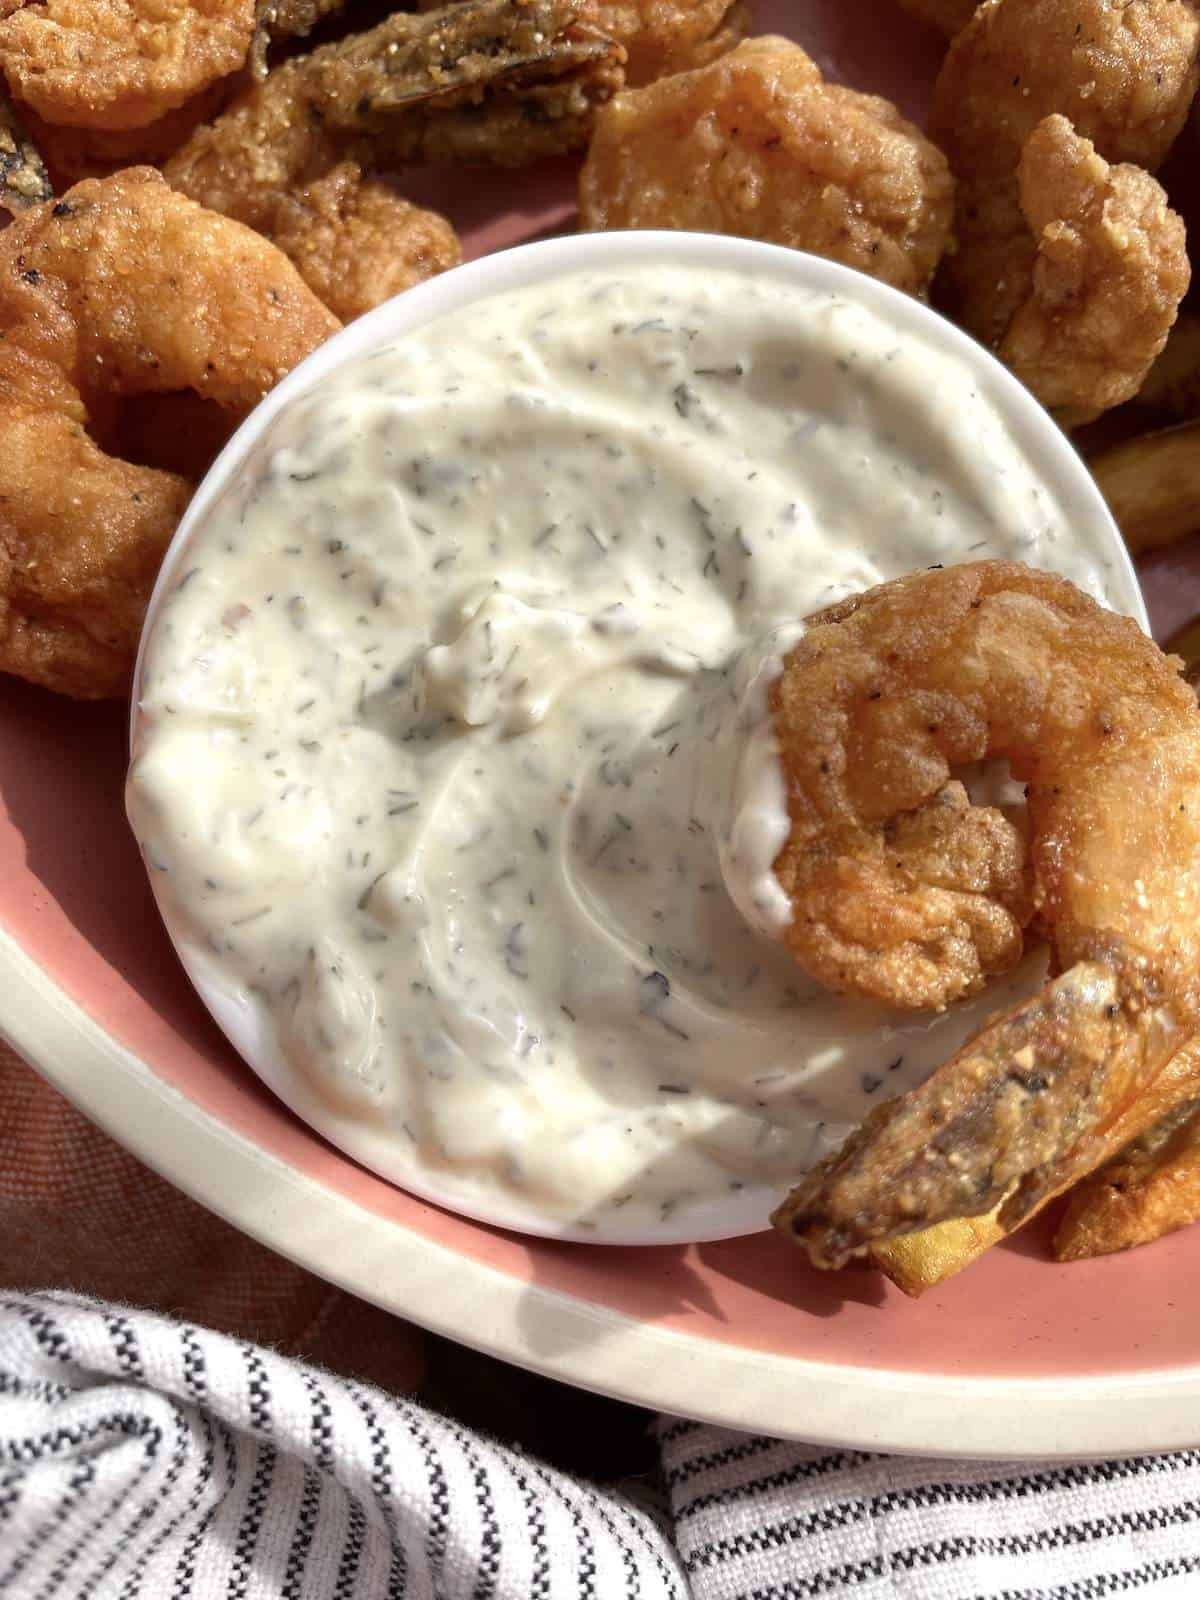 A bowl of fried shrimp with a small bowl of tartar sauce.